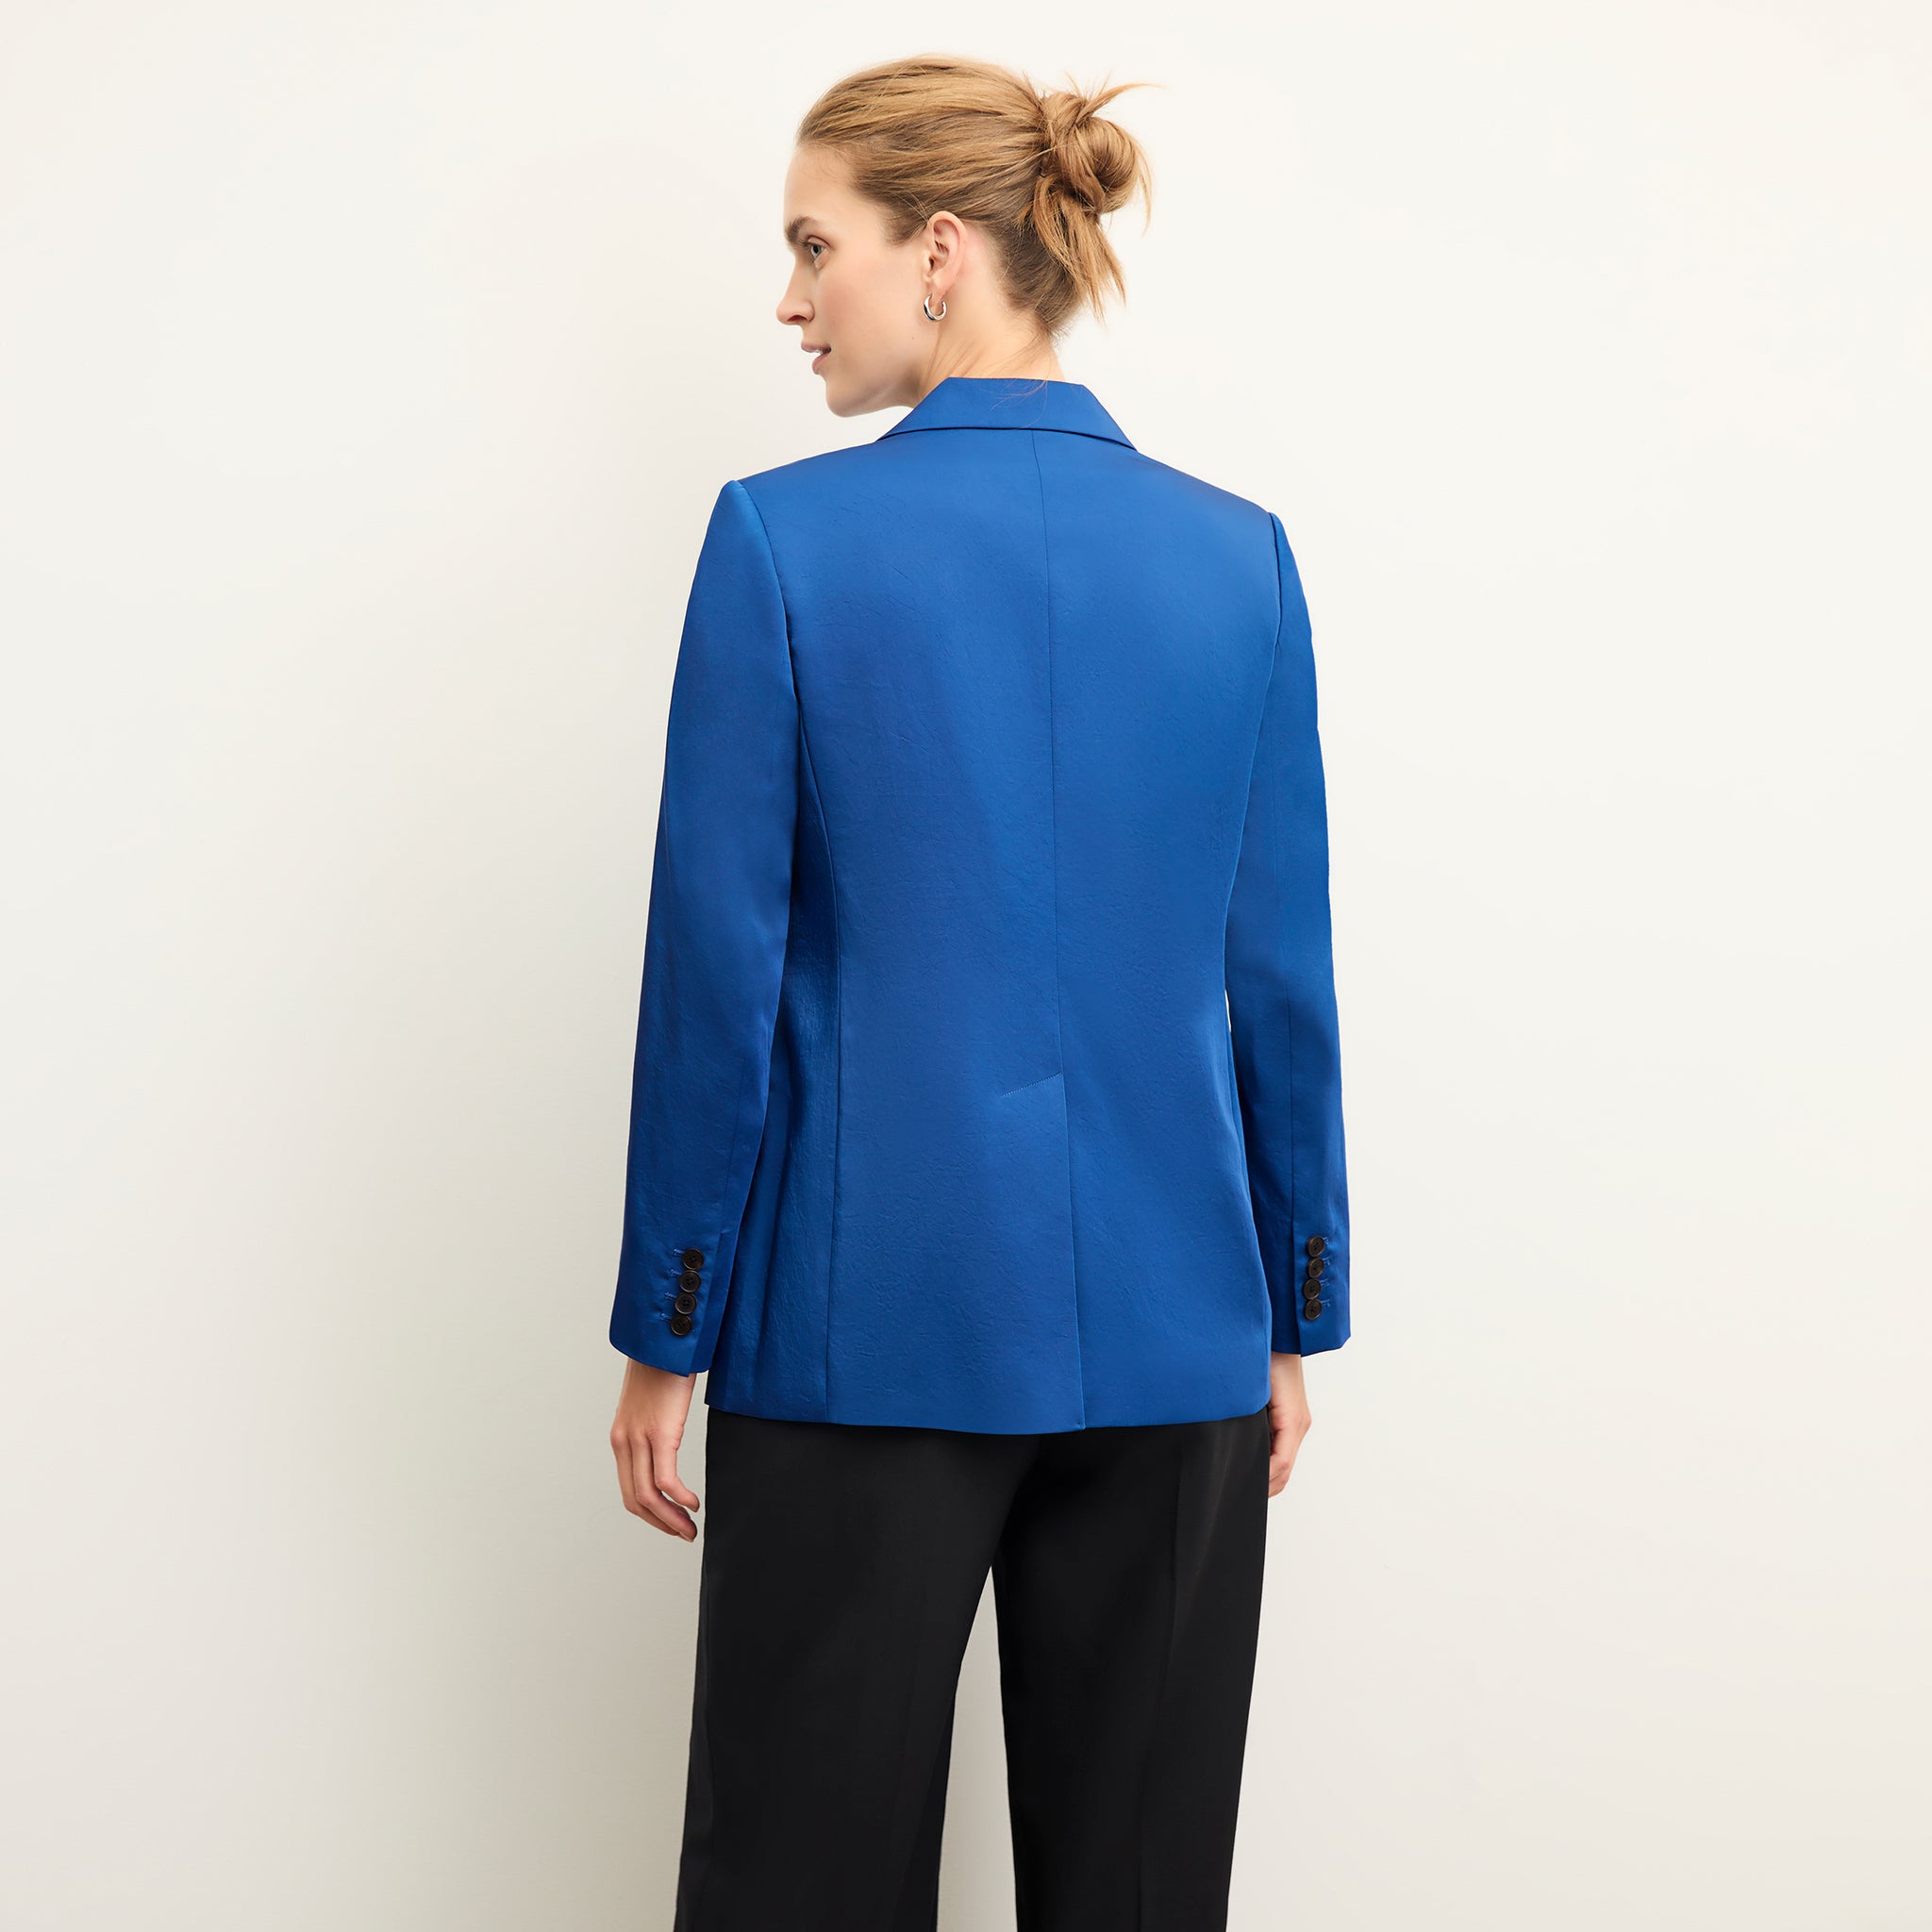 back image of a woman wearing the o'hara jacket in sapphire